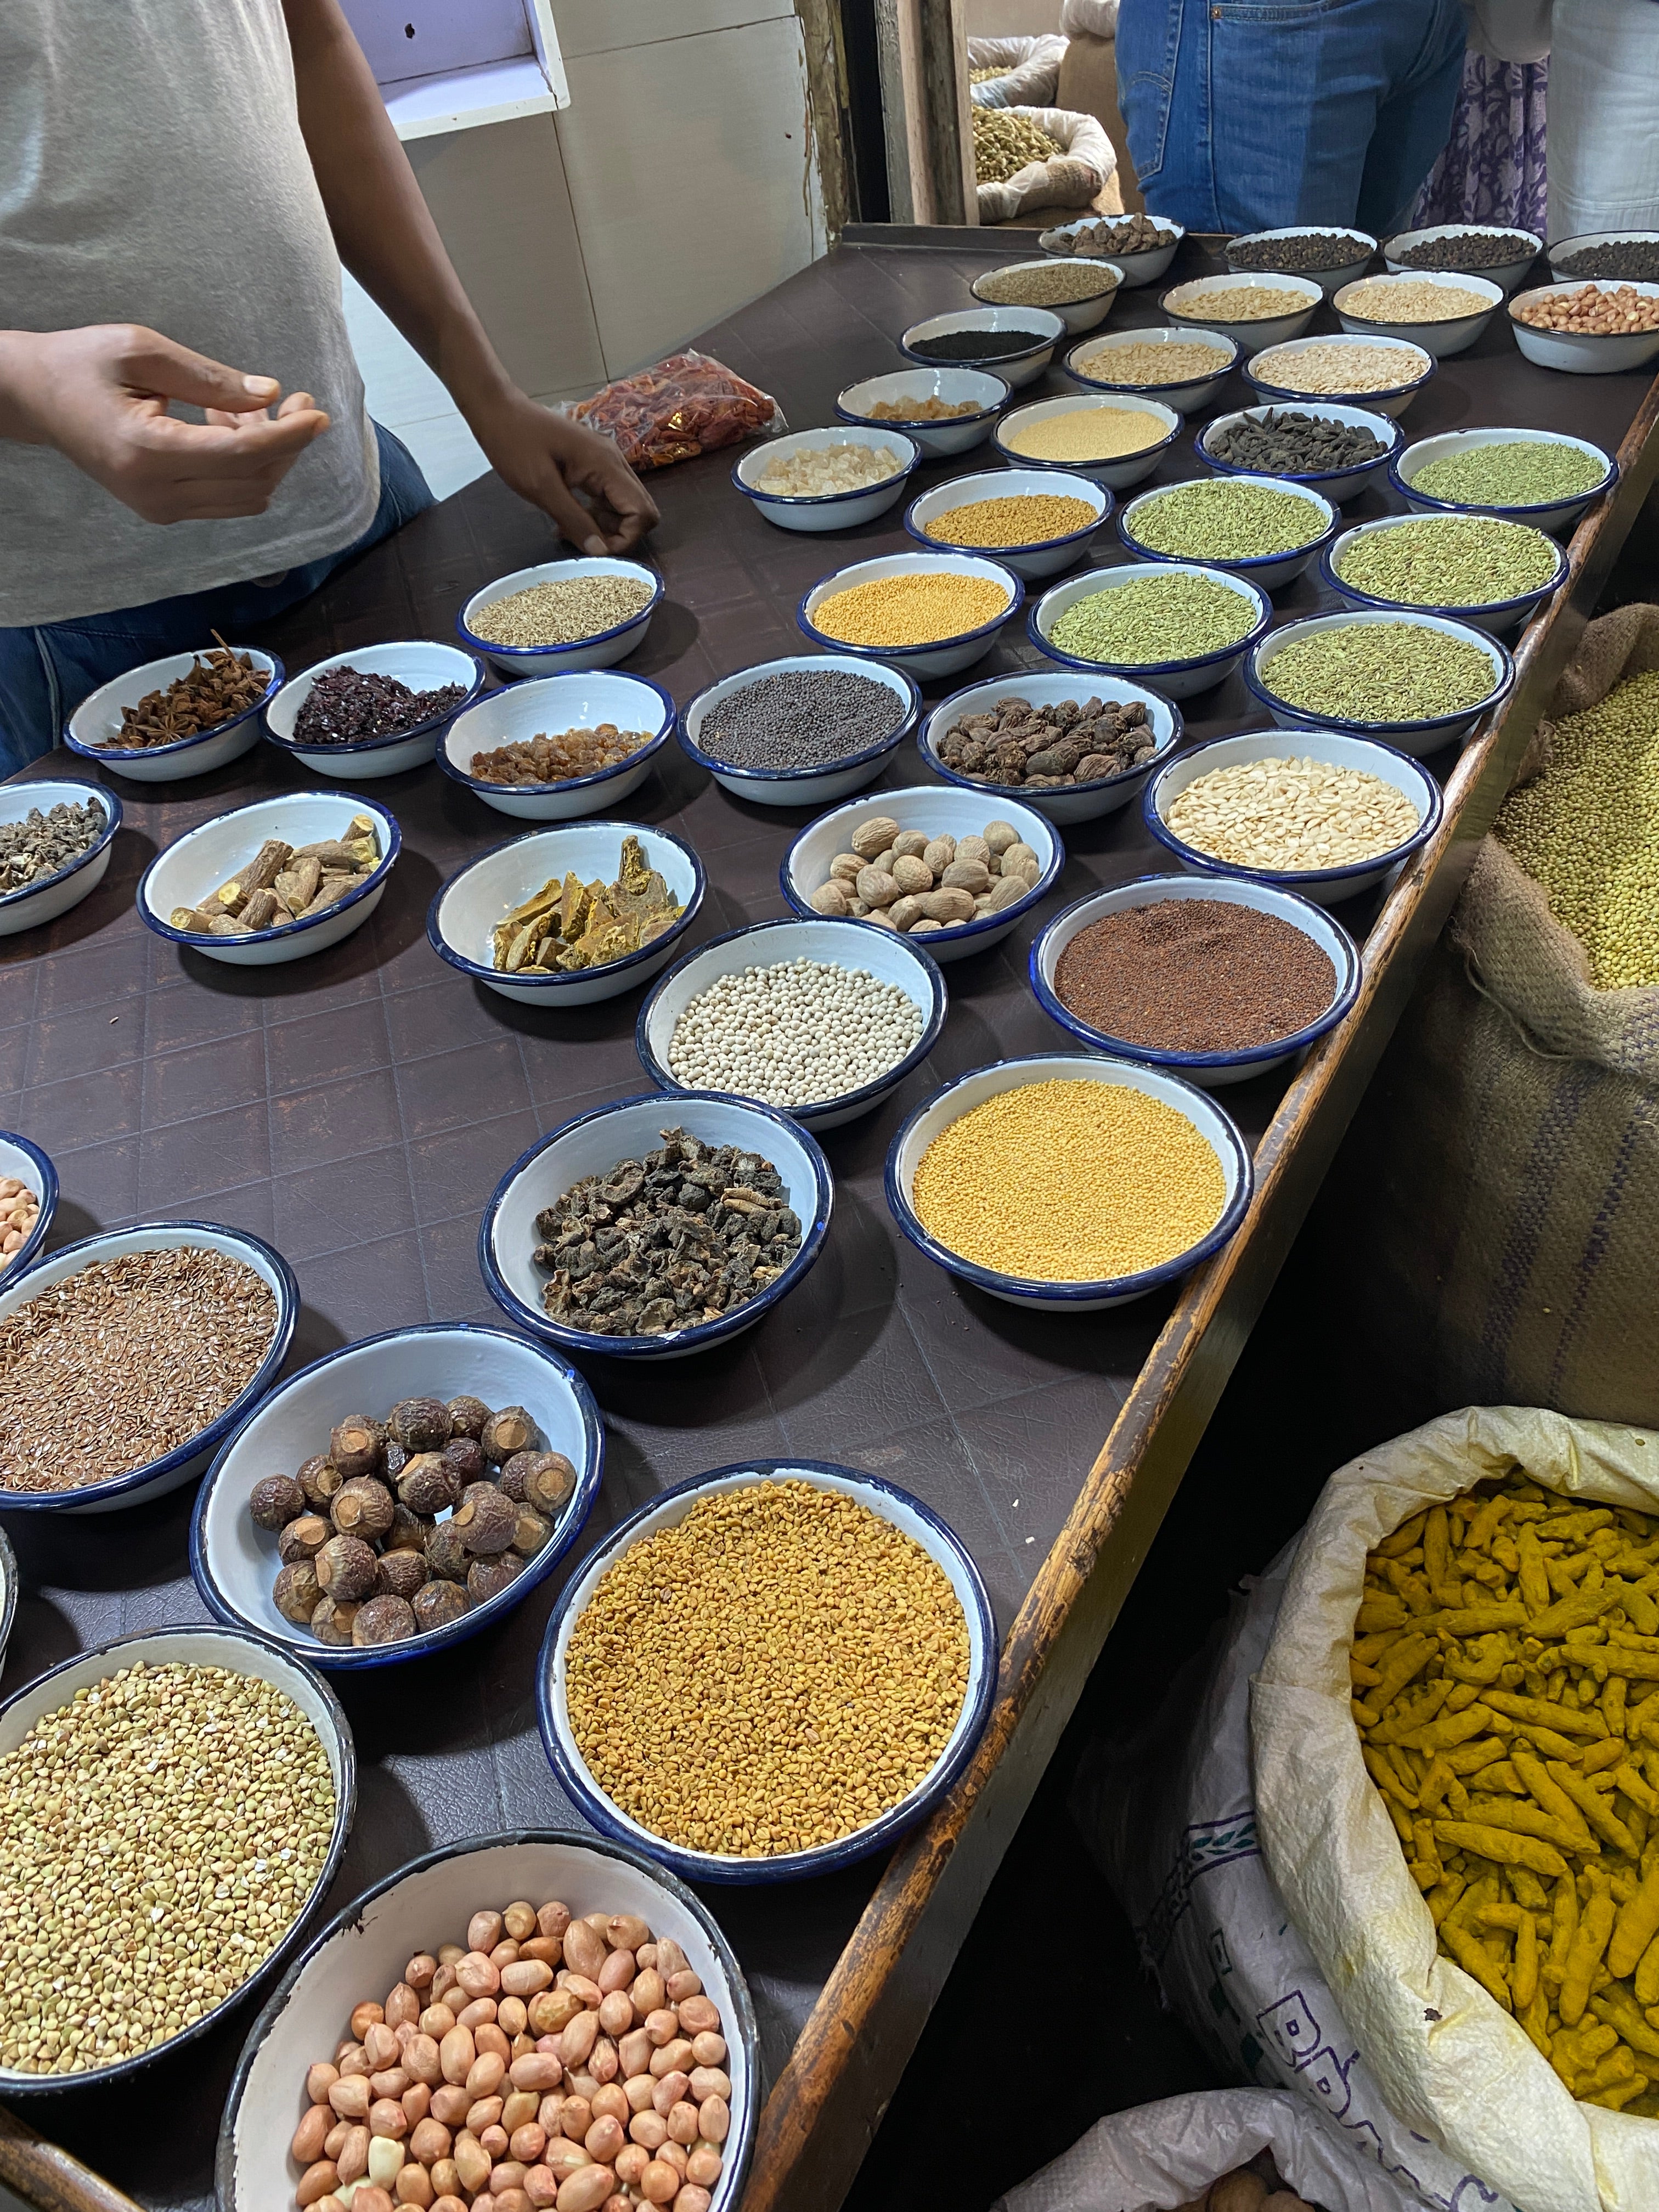 A selection of spices at the spice market in Old Delhi